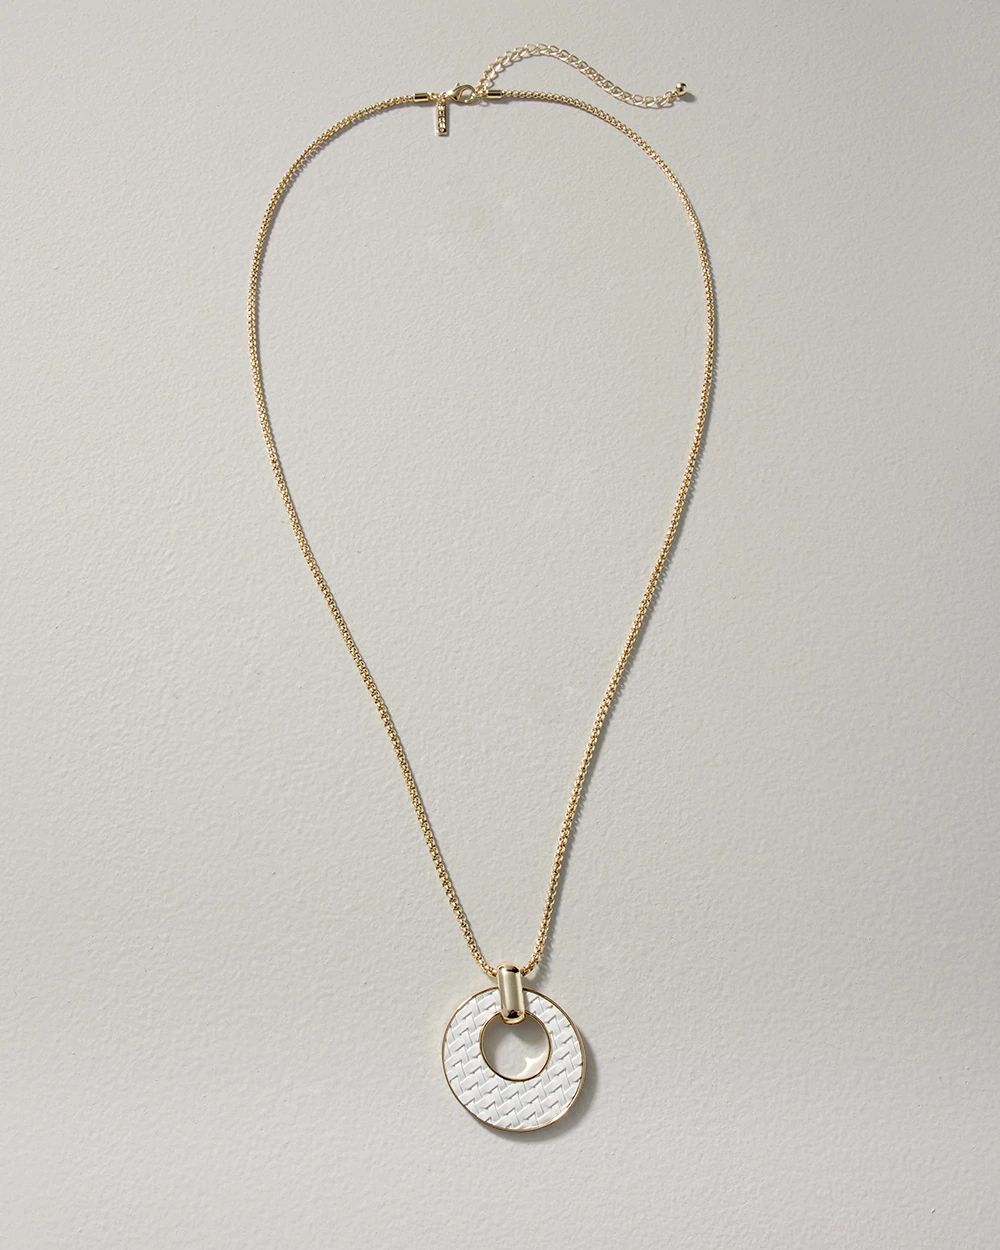 White & Goldtone Leather Pendant Necklace click to view larger image.